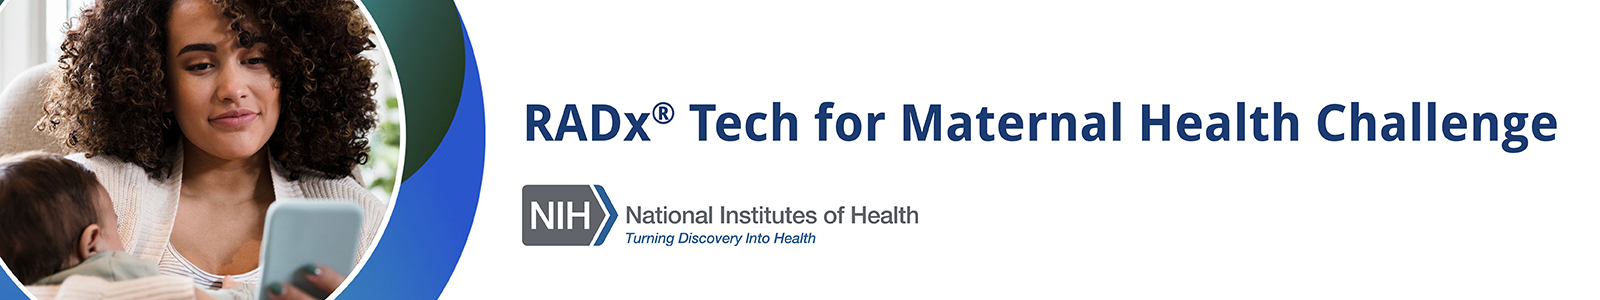 Woman holding baby next to RADx Tech for Maternal Health Challenge with NIH Logo